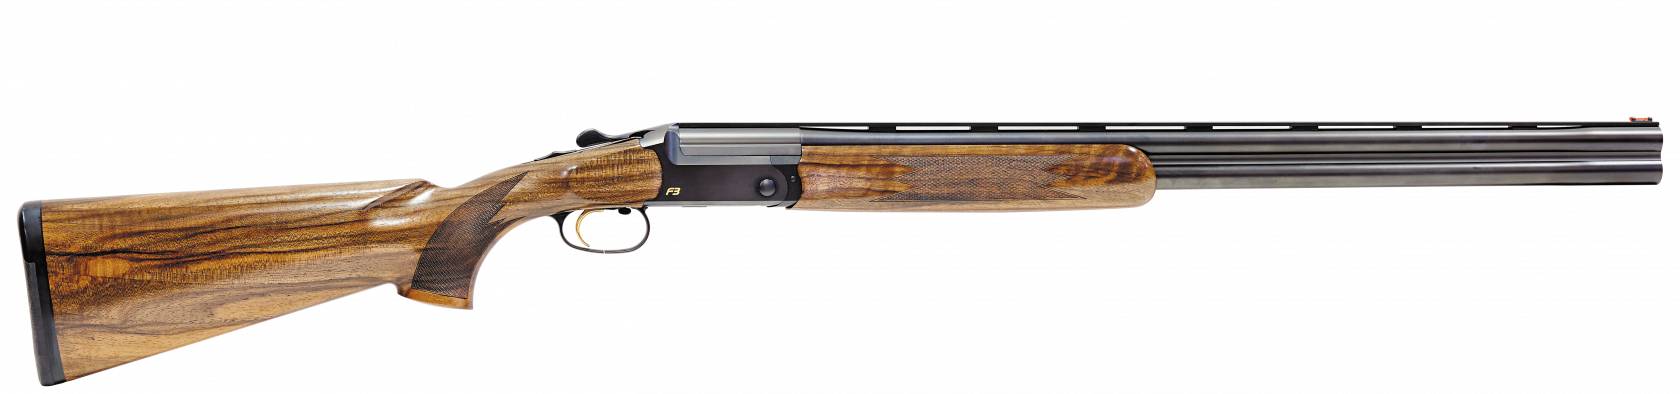 Blaser+F3+Game-Competition+St+with+options+12-76-740.png